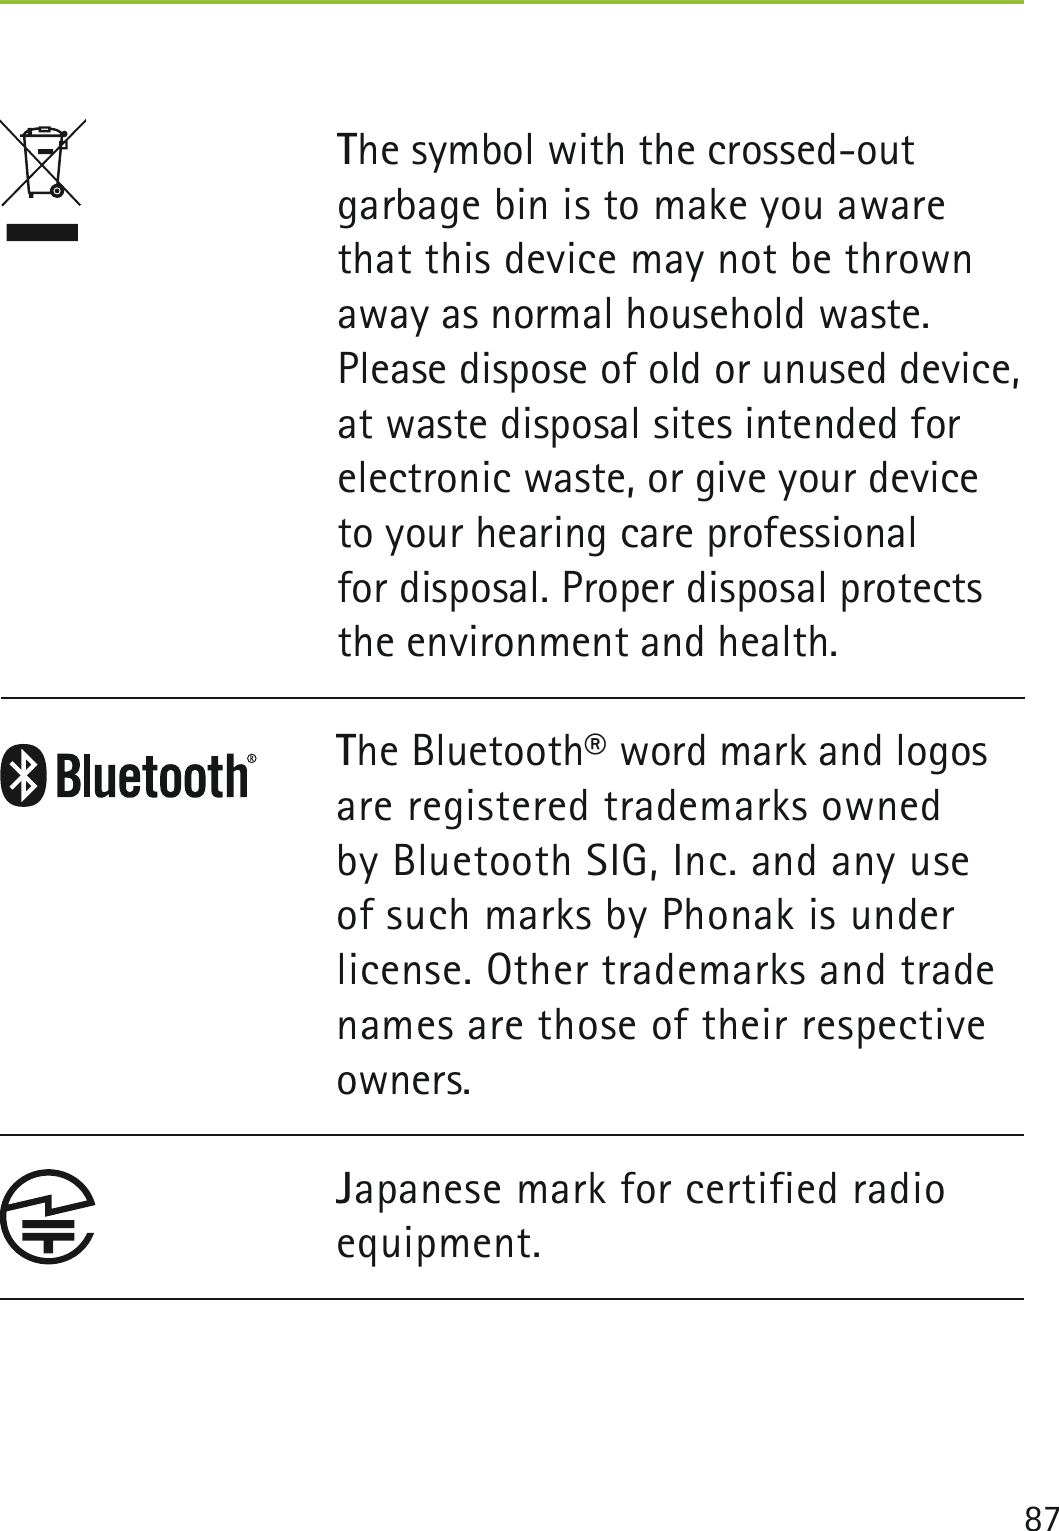 87 The symbol with the crossed-out garbage bin is to make you aware that this device may not be thrown away as normal household waste. Please dispose of old or unused device, at waste disposal sites intended for electronic waste, or give your device to your hearing care professional  for disposal. Proper disposal protects the environment and health.The Bluetooth® word mark and logos are registered trademarks owned by Bluetooth SIG, Inc. and any use of such marks by Phonak is under license. Other trademarks and trade names are those of their respective owners.Japanese mark for certified radio equipment.